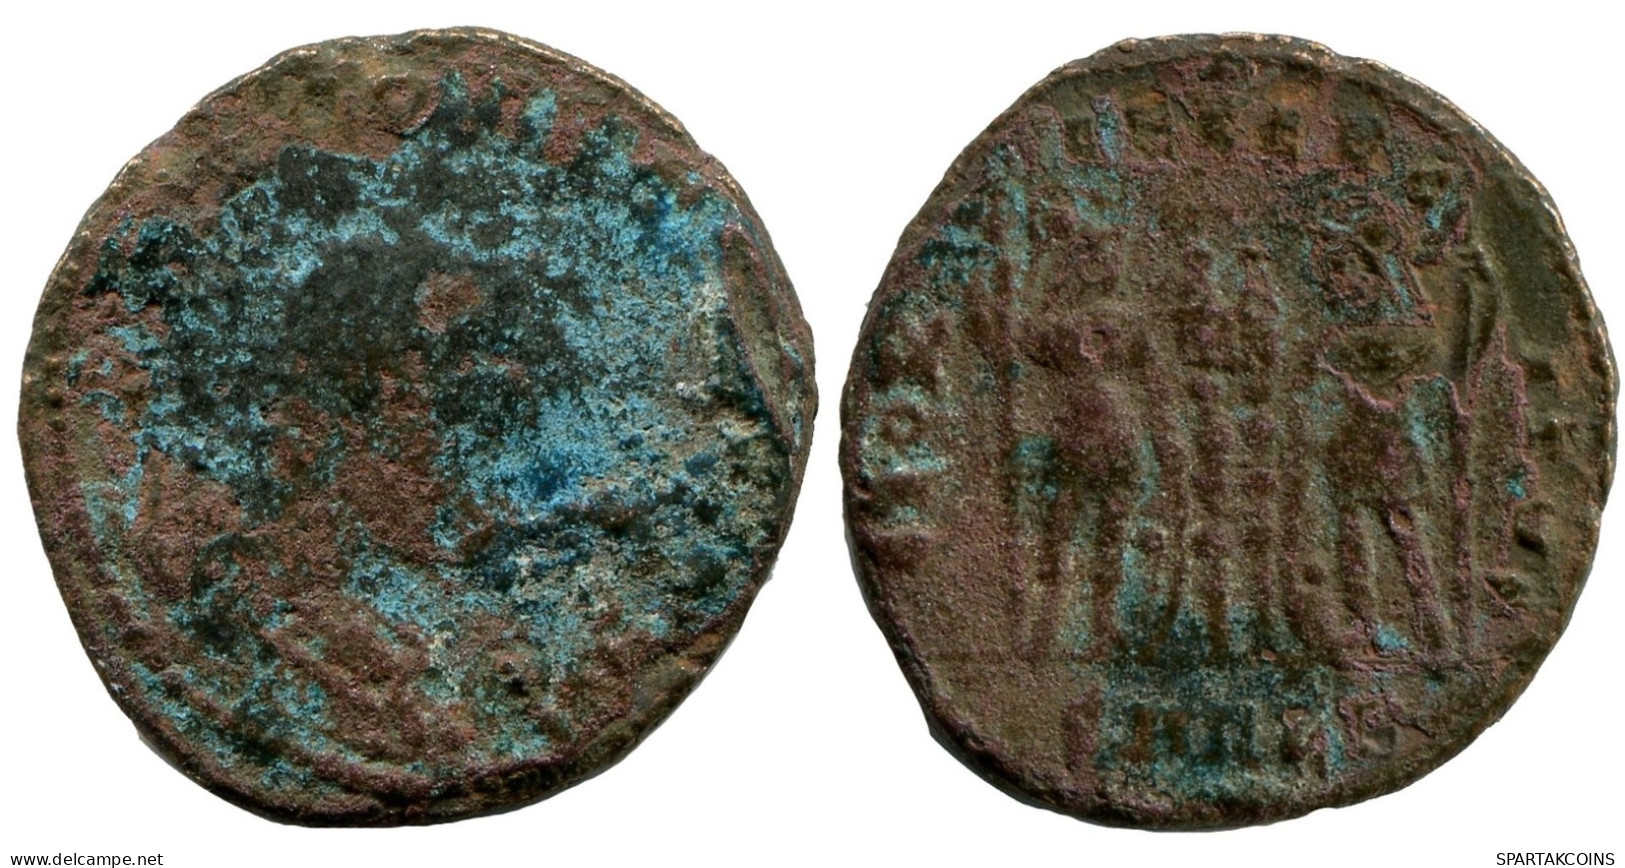 CONSTANTINE I MINTED IN ANTIOCH FOUND IN IHNASYAH HOARD EGYPT #ANC10584.14.F.A - The Christian Empire (307 AD To 363 AD)